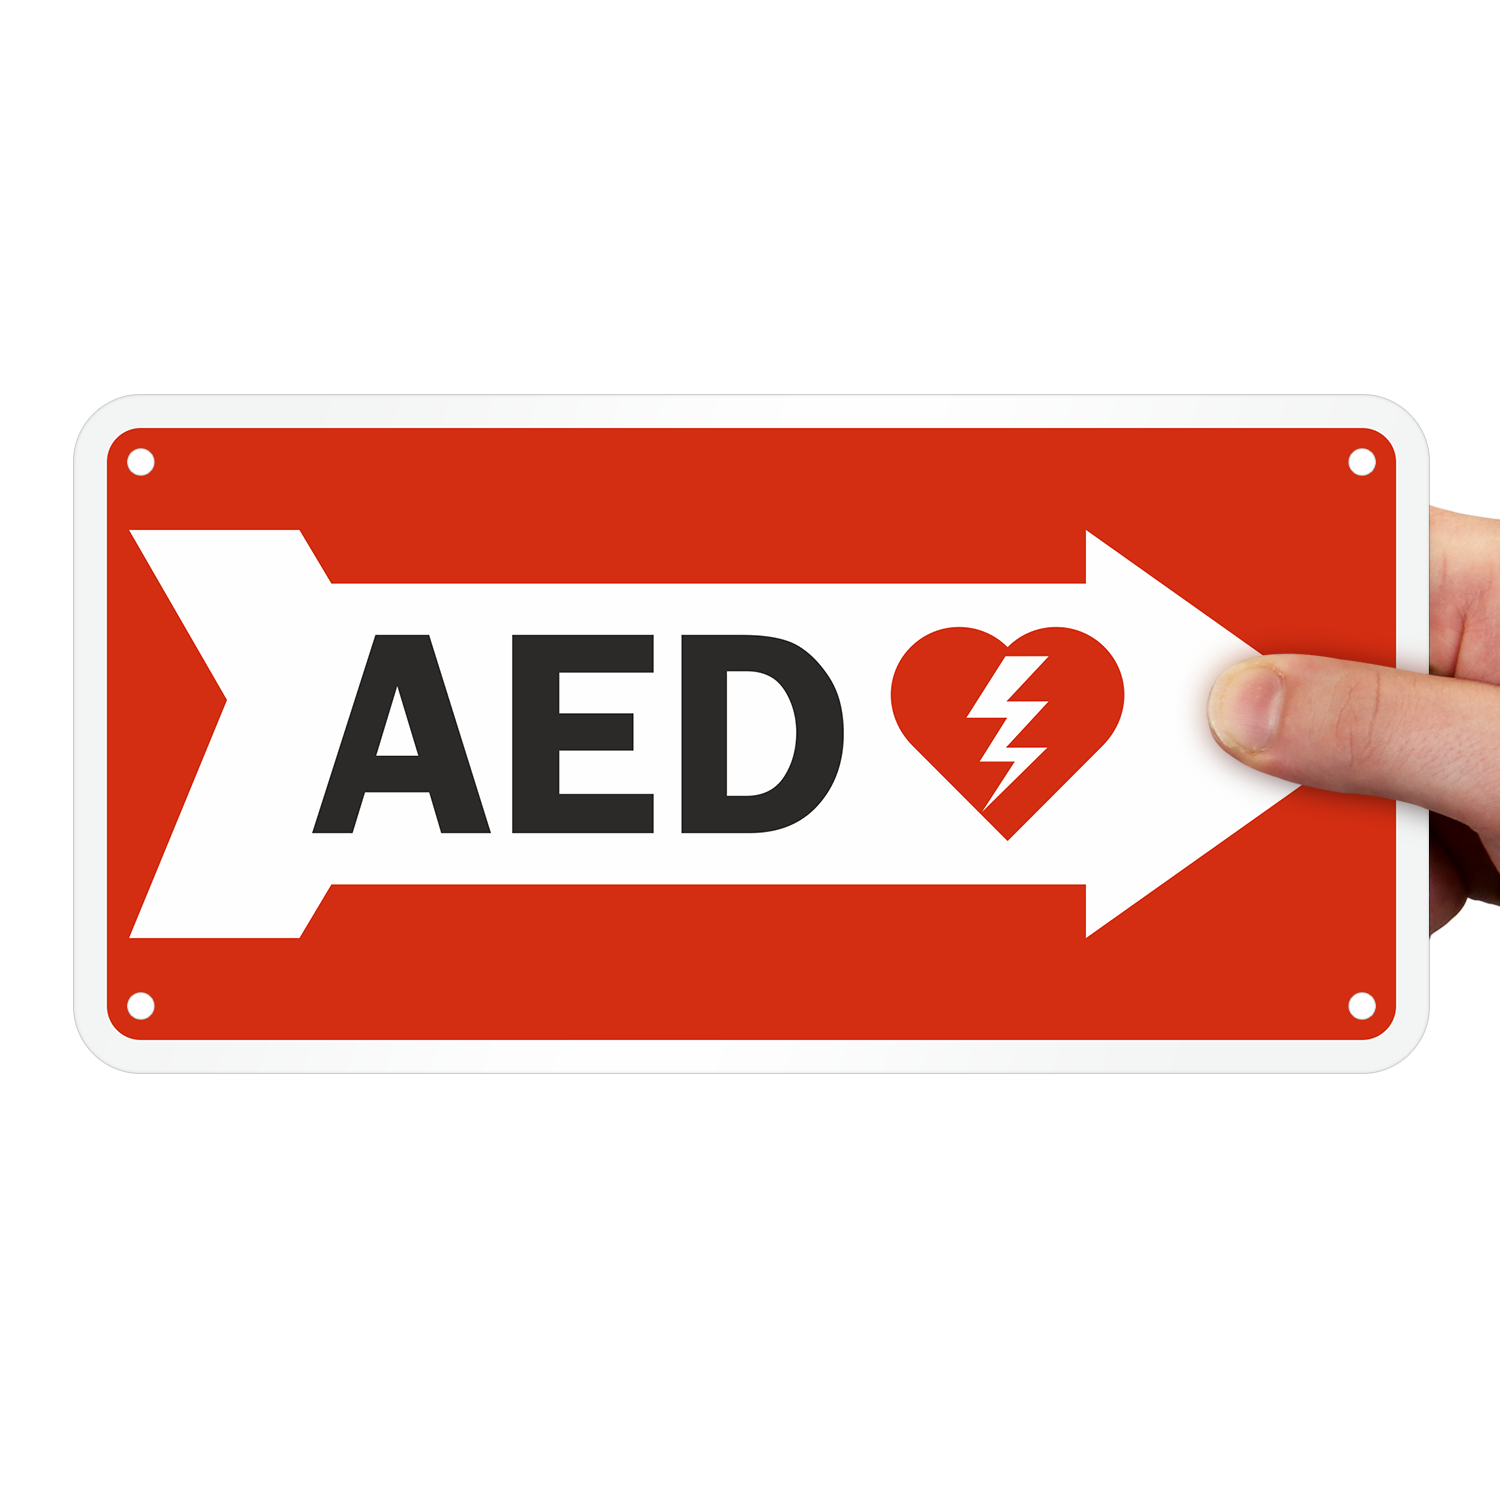 Automated External Defibrillator right arrow sign